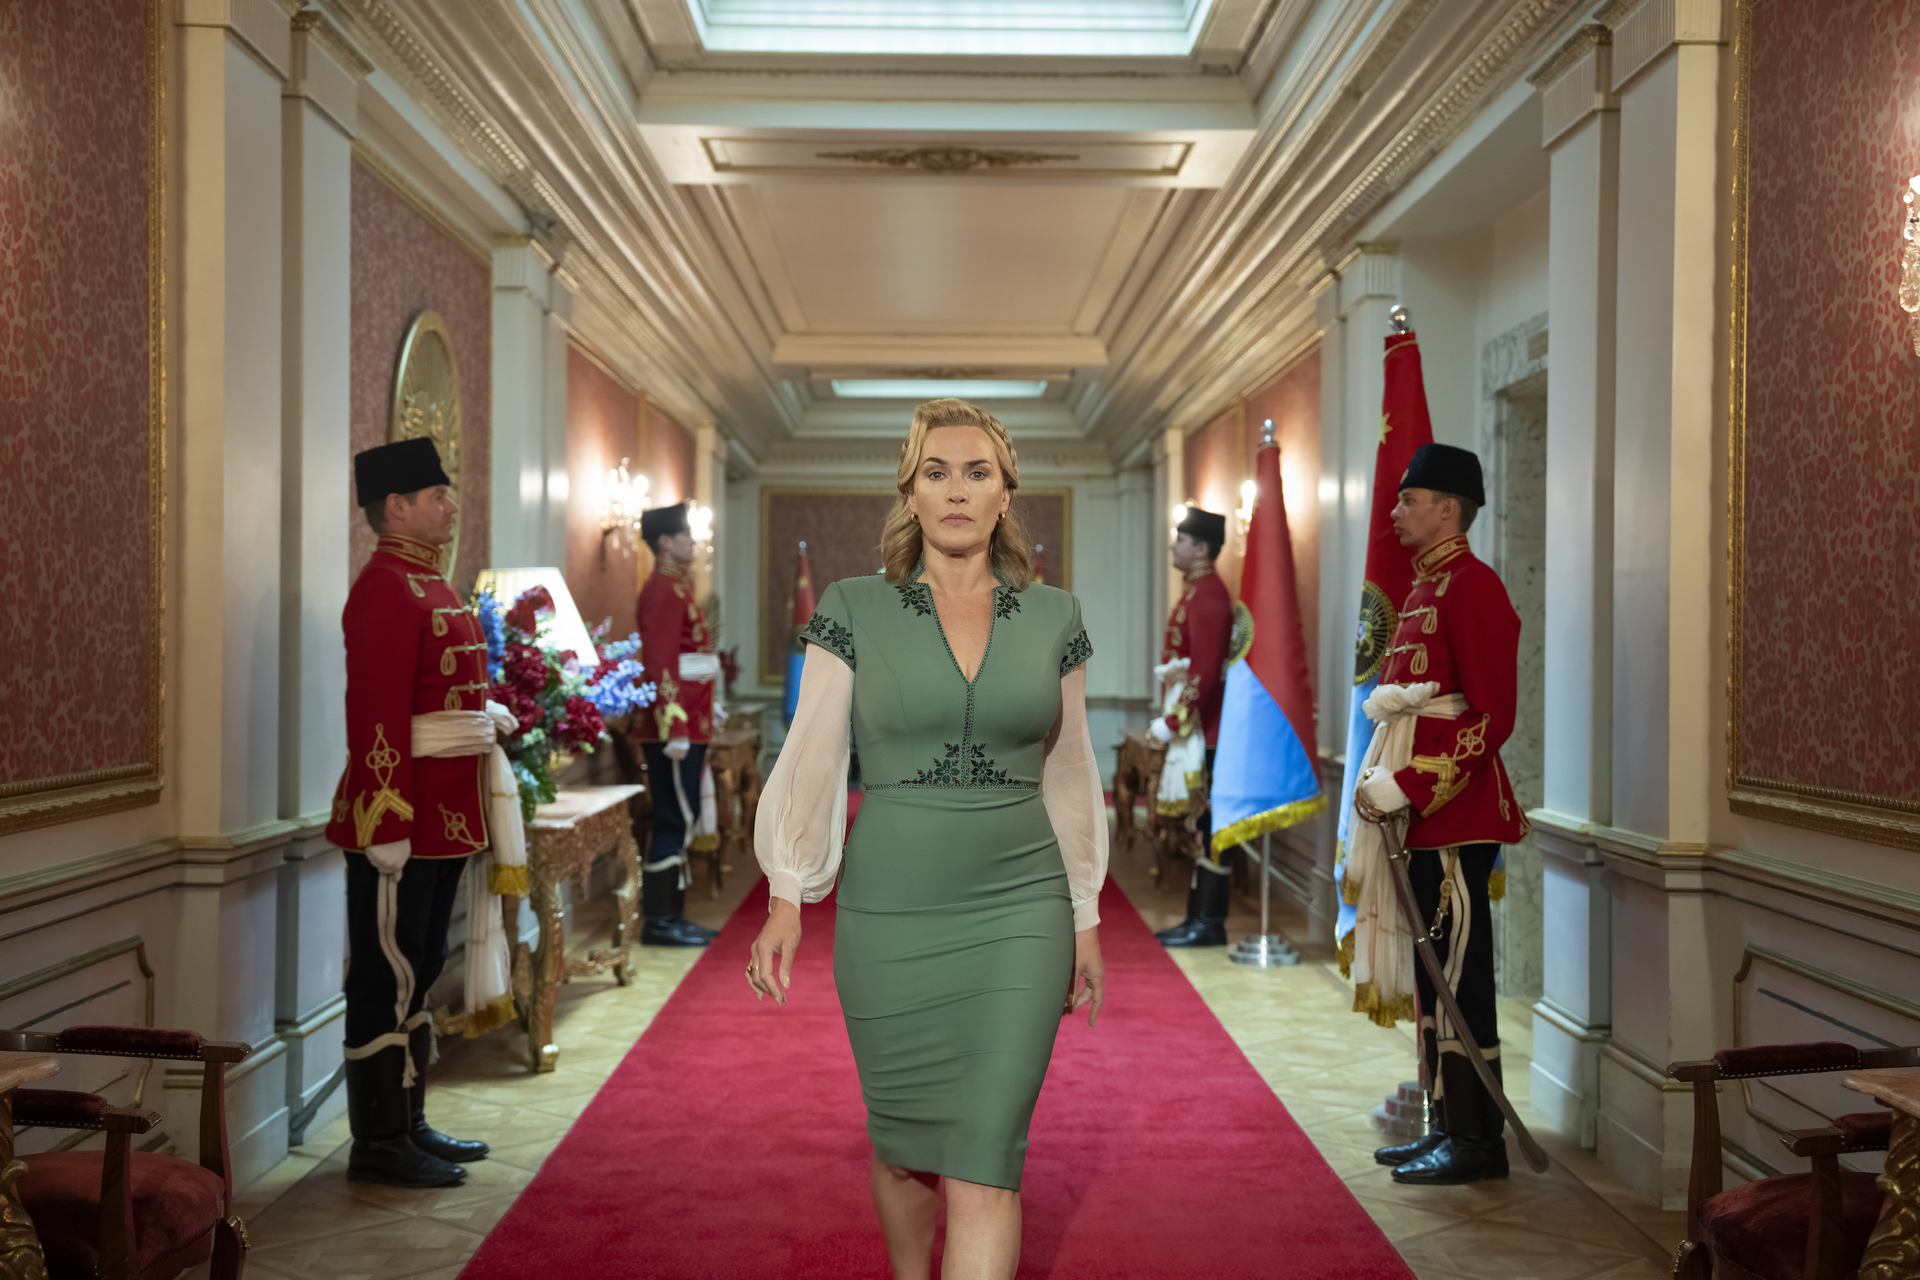 Kate Winslet as Chancellor Elena Vernham in Will Tracy's HBO political drama satire limited series, The Regime